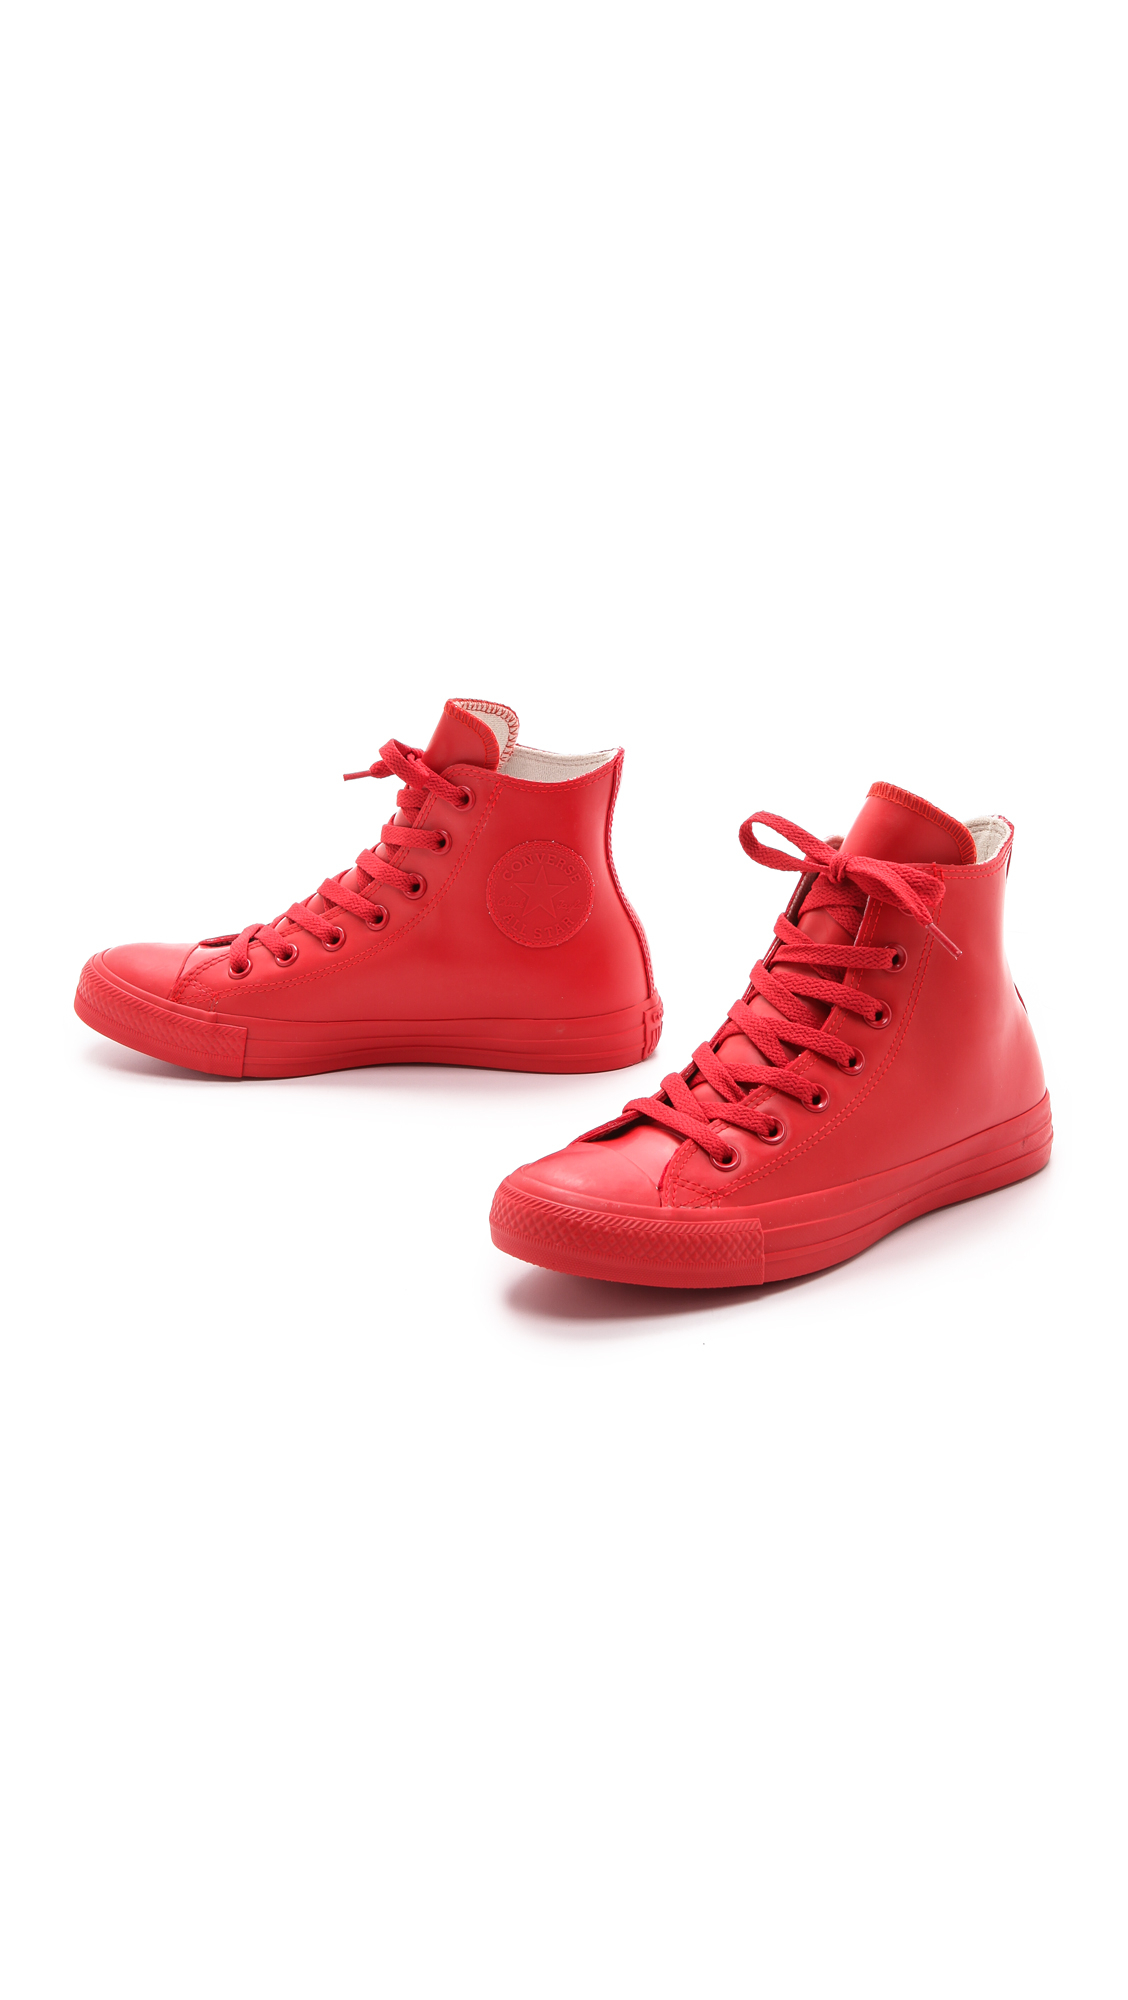 Eh Marco de referencia Alegre Converse Rubber Coated Chuck Taylor All Star Sneakers - Red | Lyst